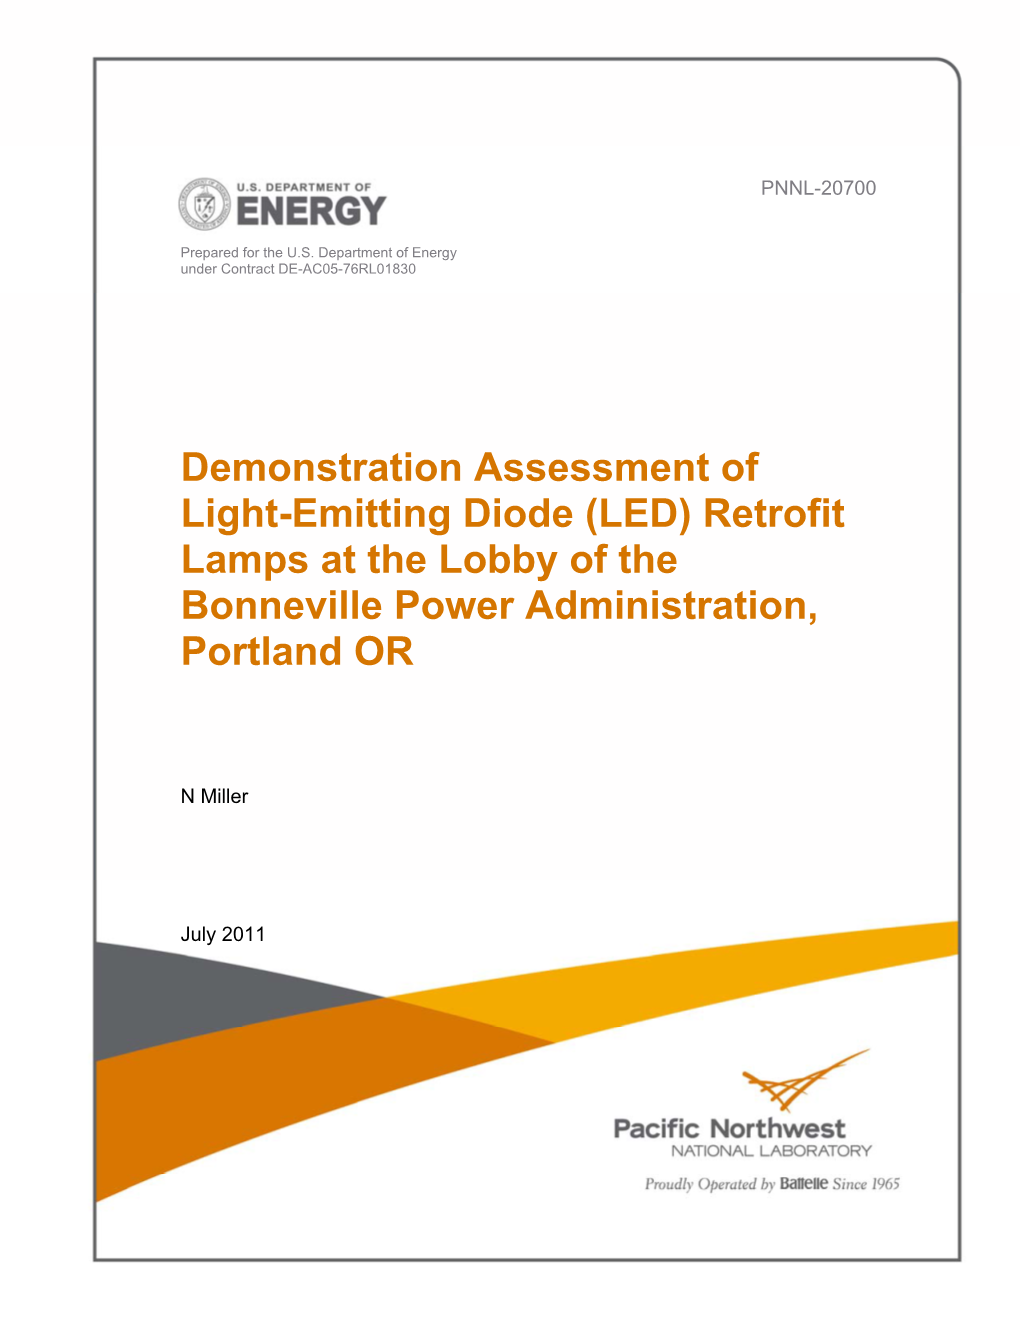 Demonstration Assessment of Light-Emitting Diode (LED) Retrofit Lamps at the Lobby of the Bonneville Power Administration, Portland OR